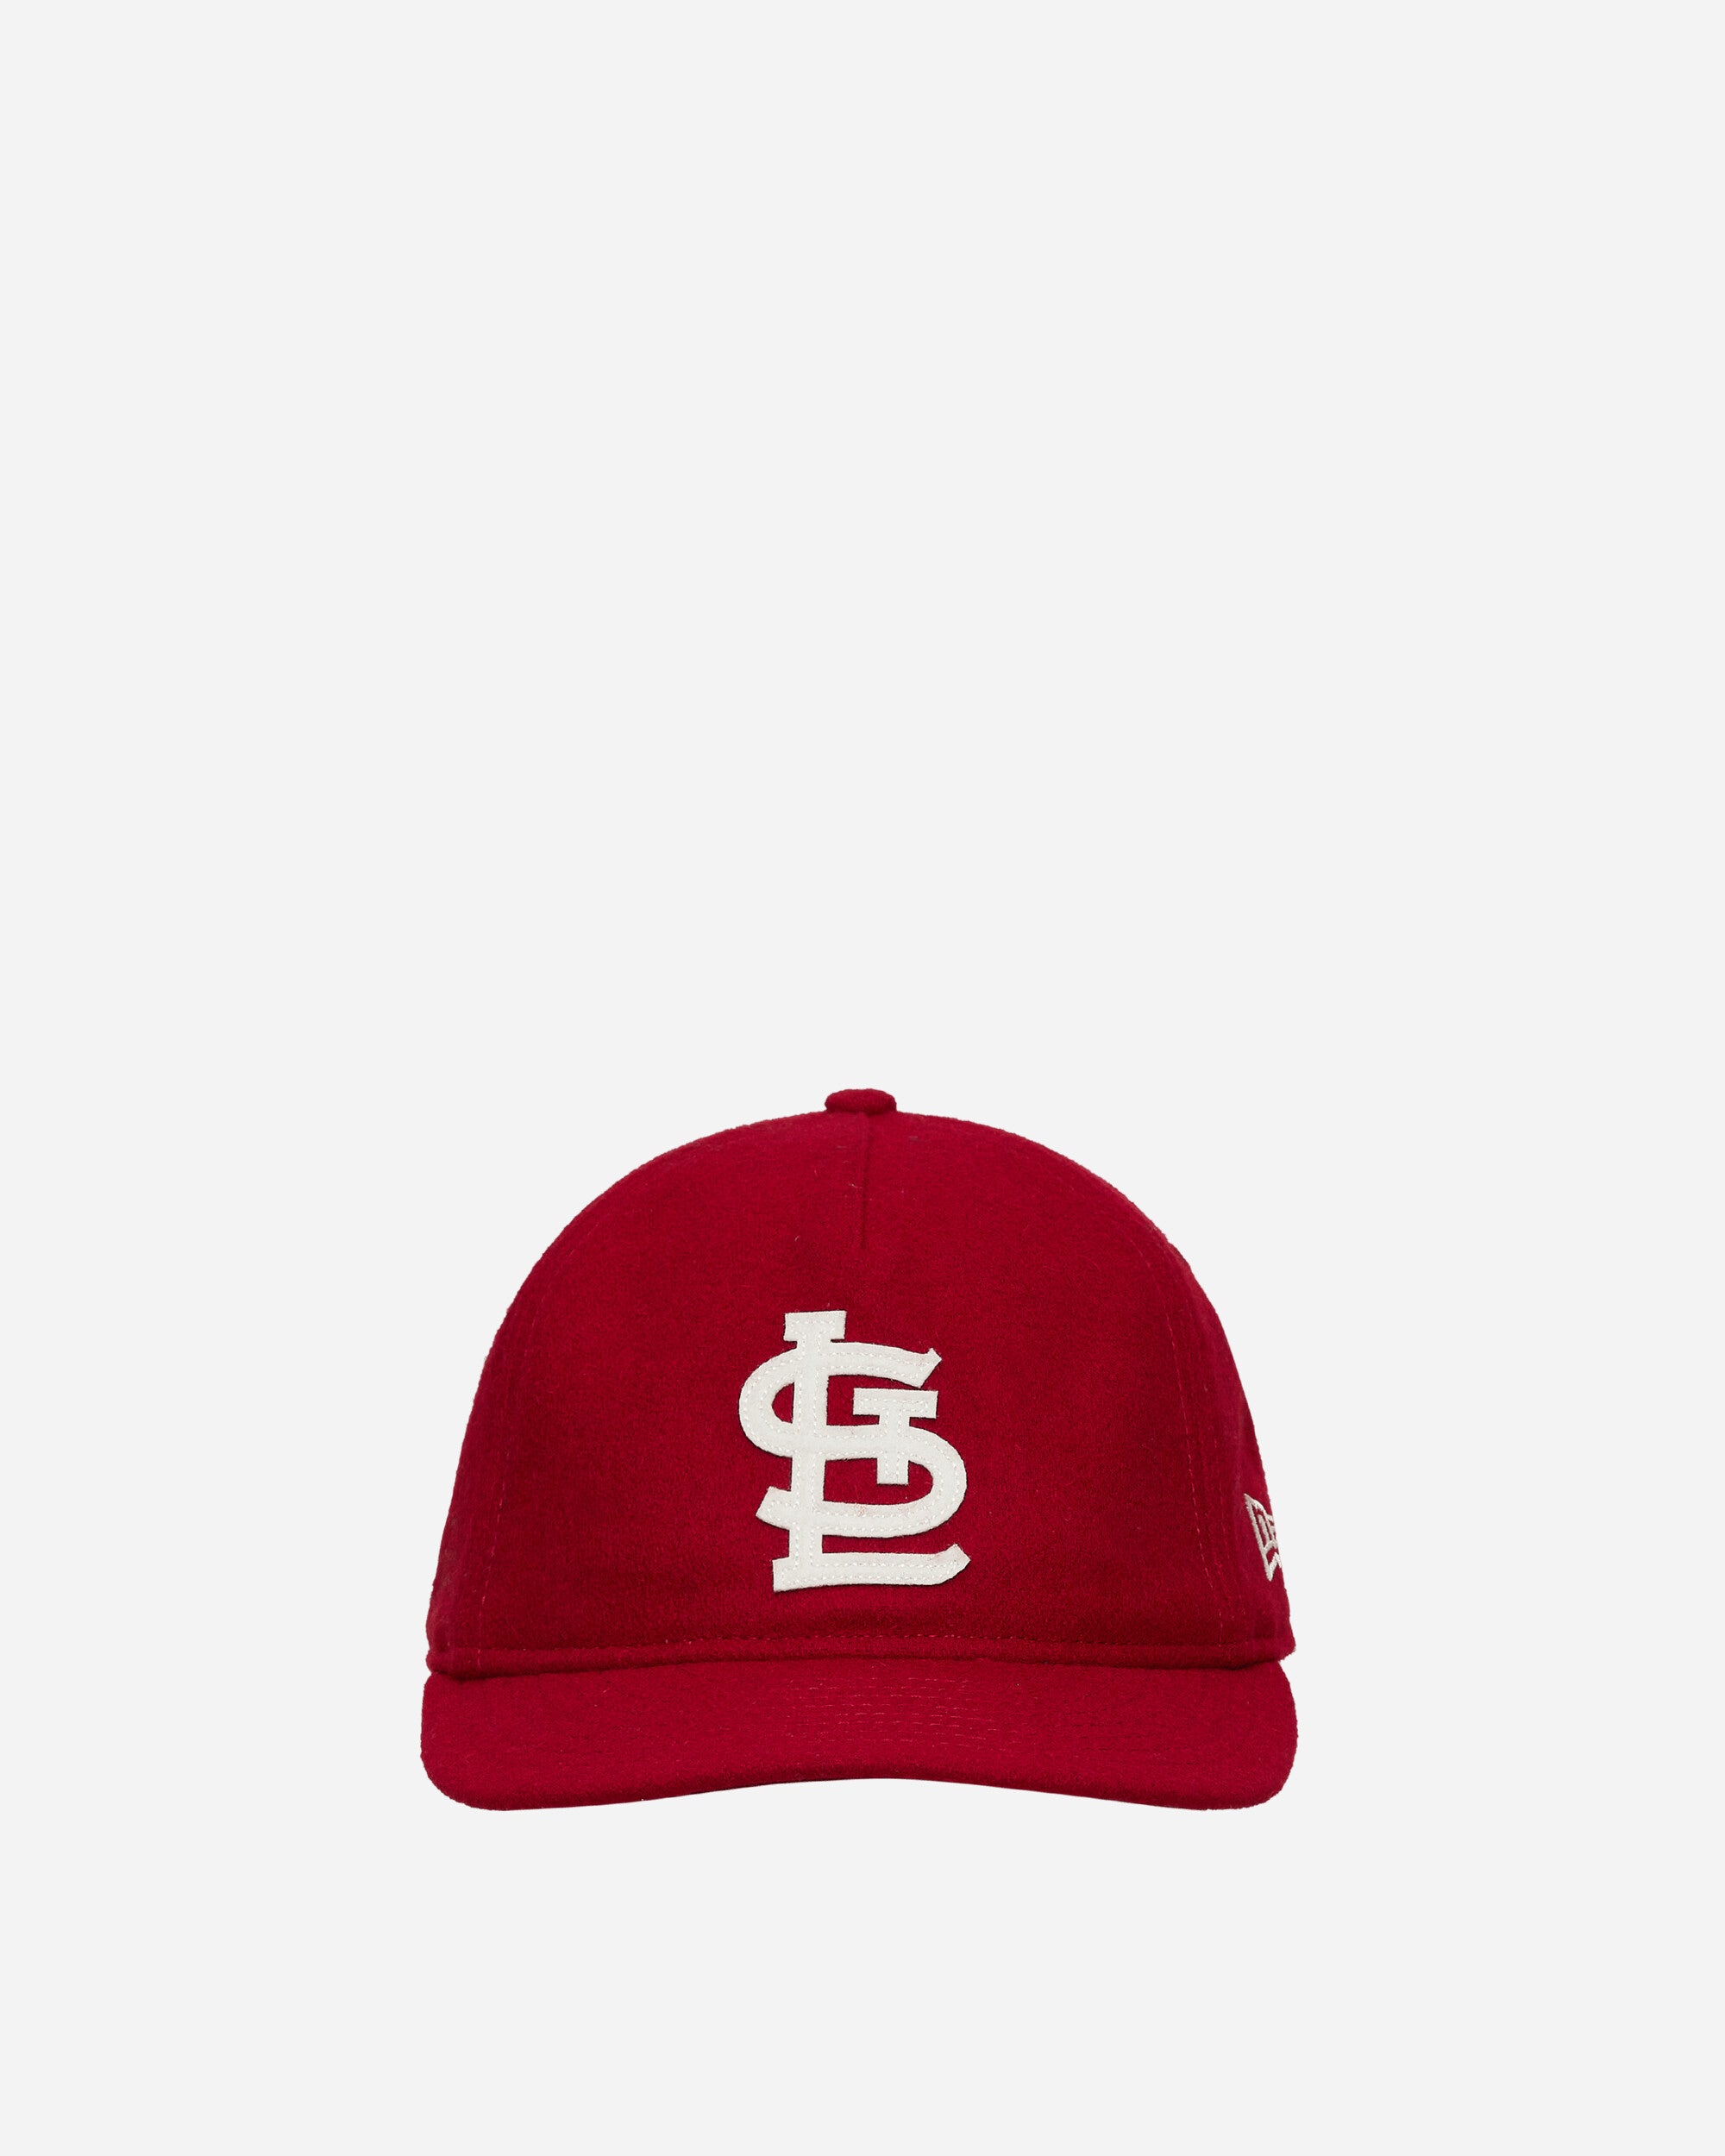 St. Louis Cardinals MLB Cooperstown Retrocrown 9FIFTY Strapback Cap Maroon